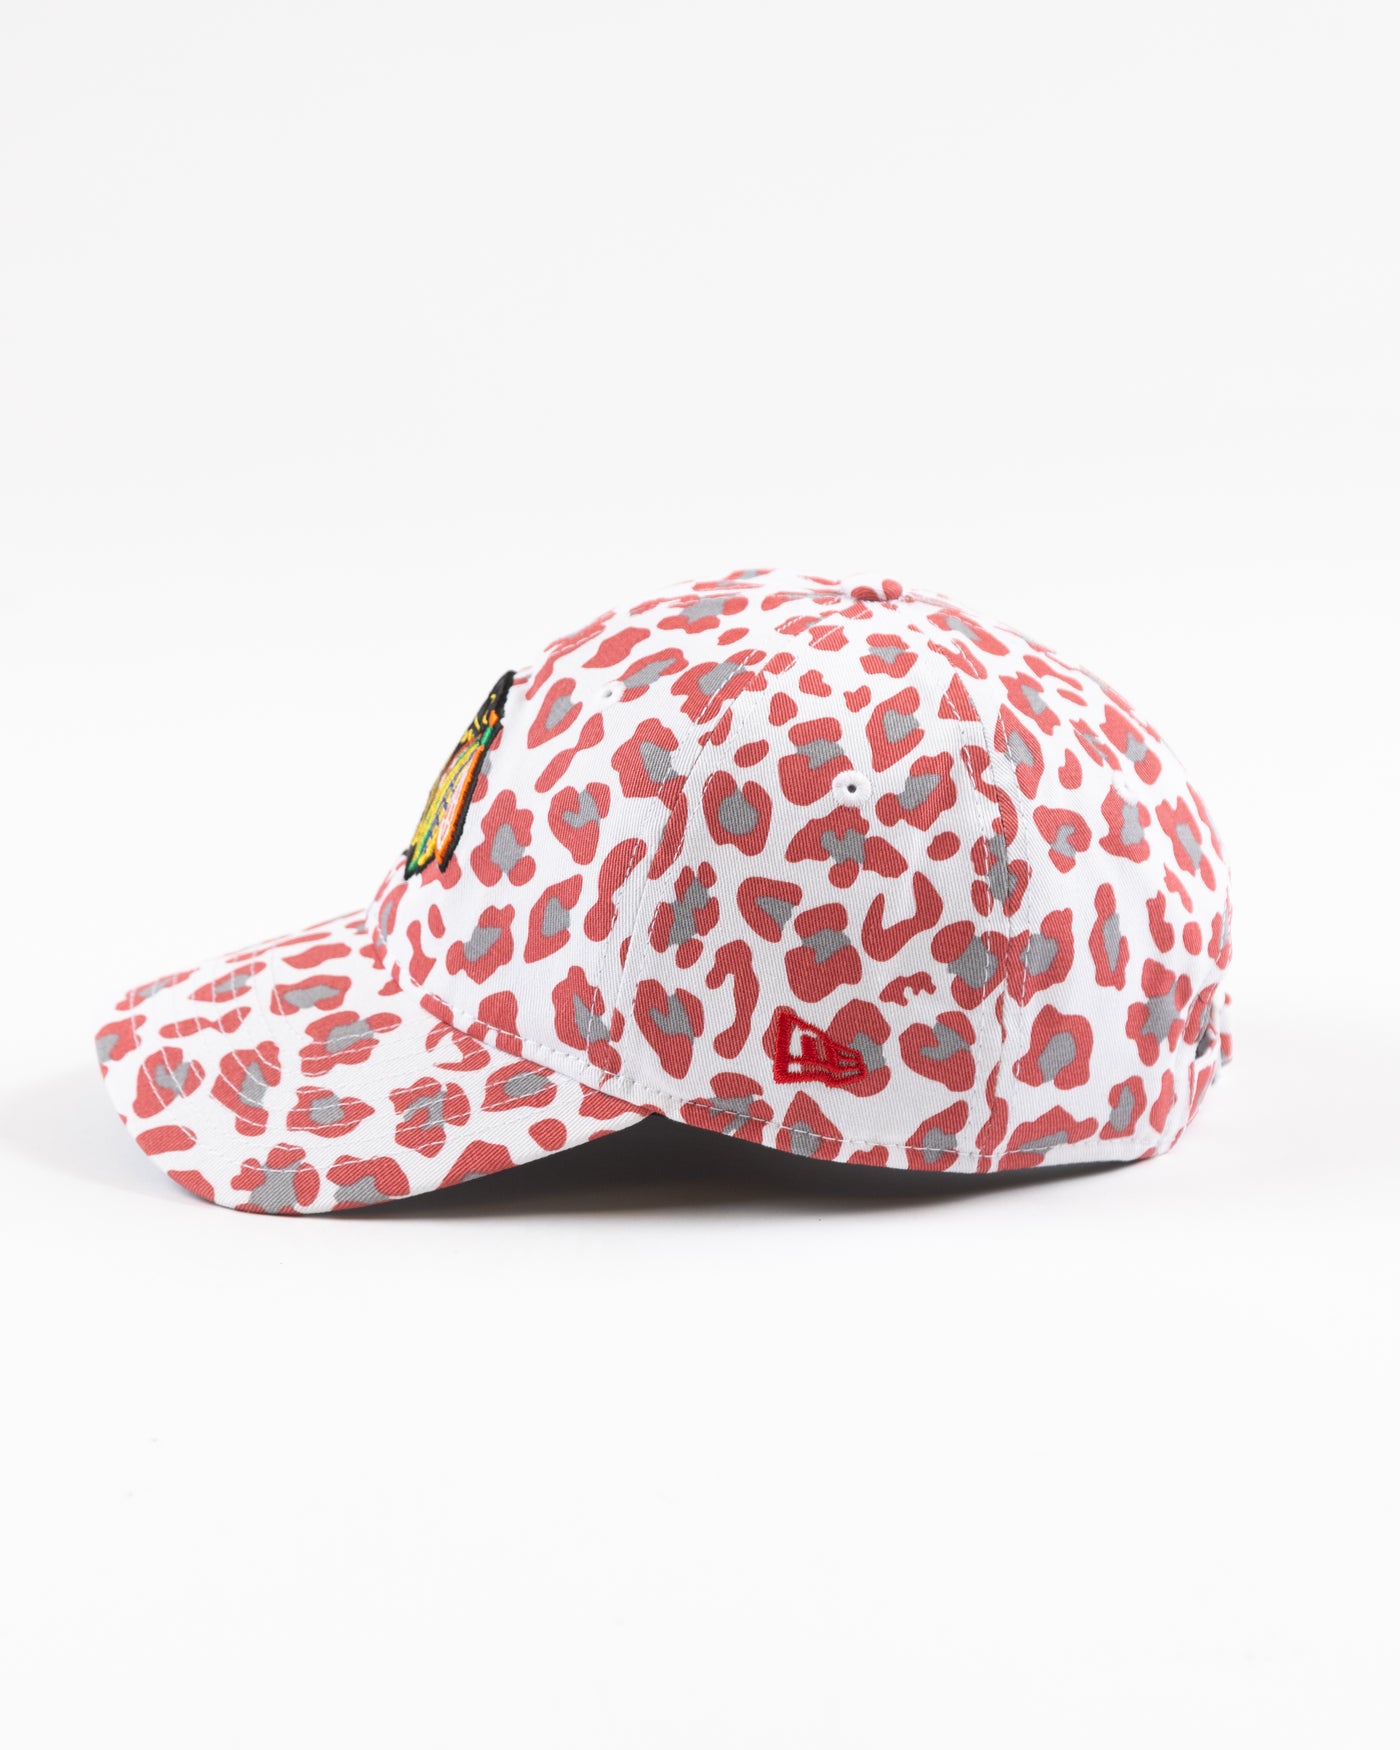 white New Era women's cap with all over pink cheetah print and Chicago Blackhawks primary logo on front - left side lay flat